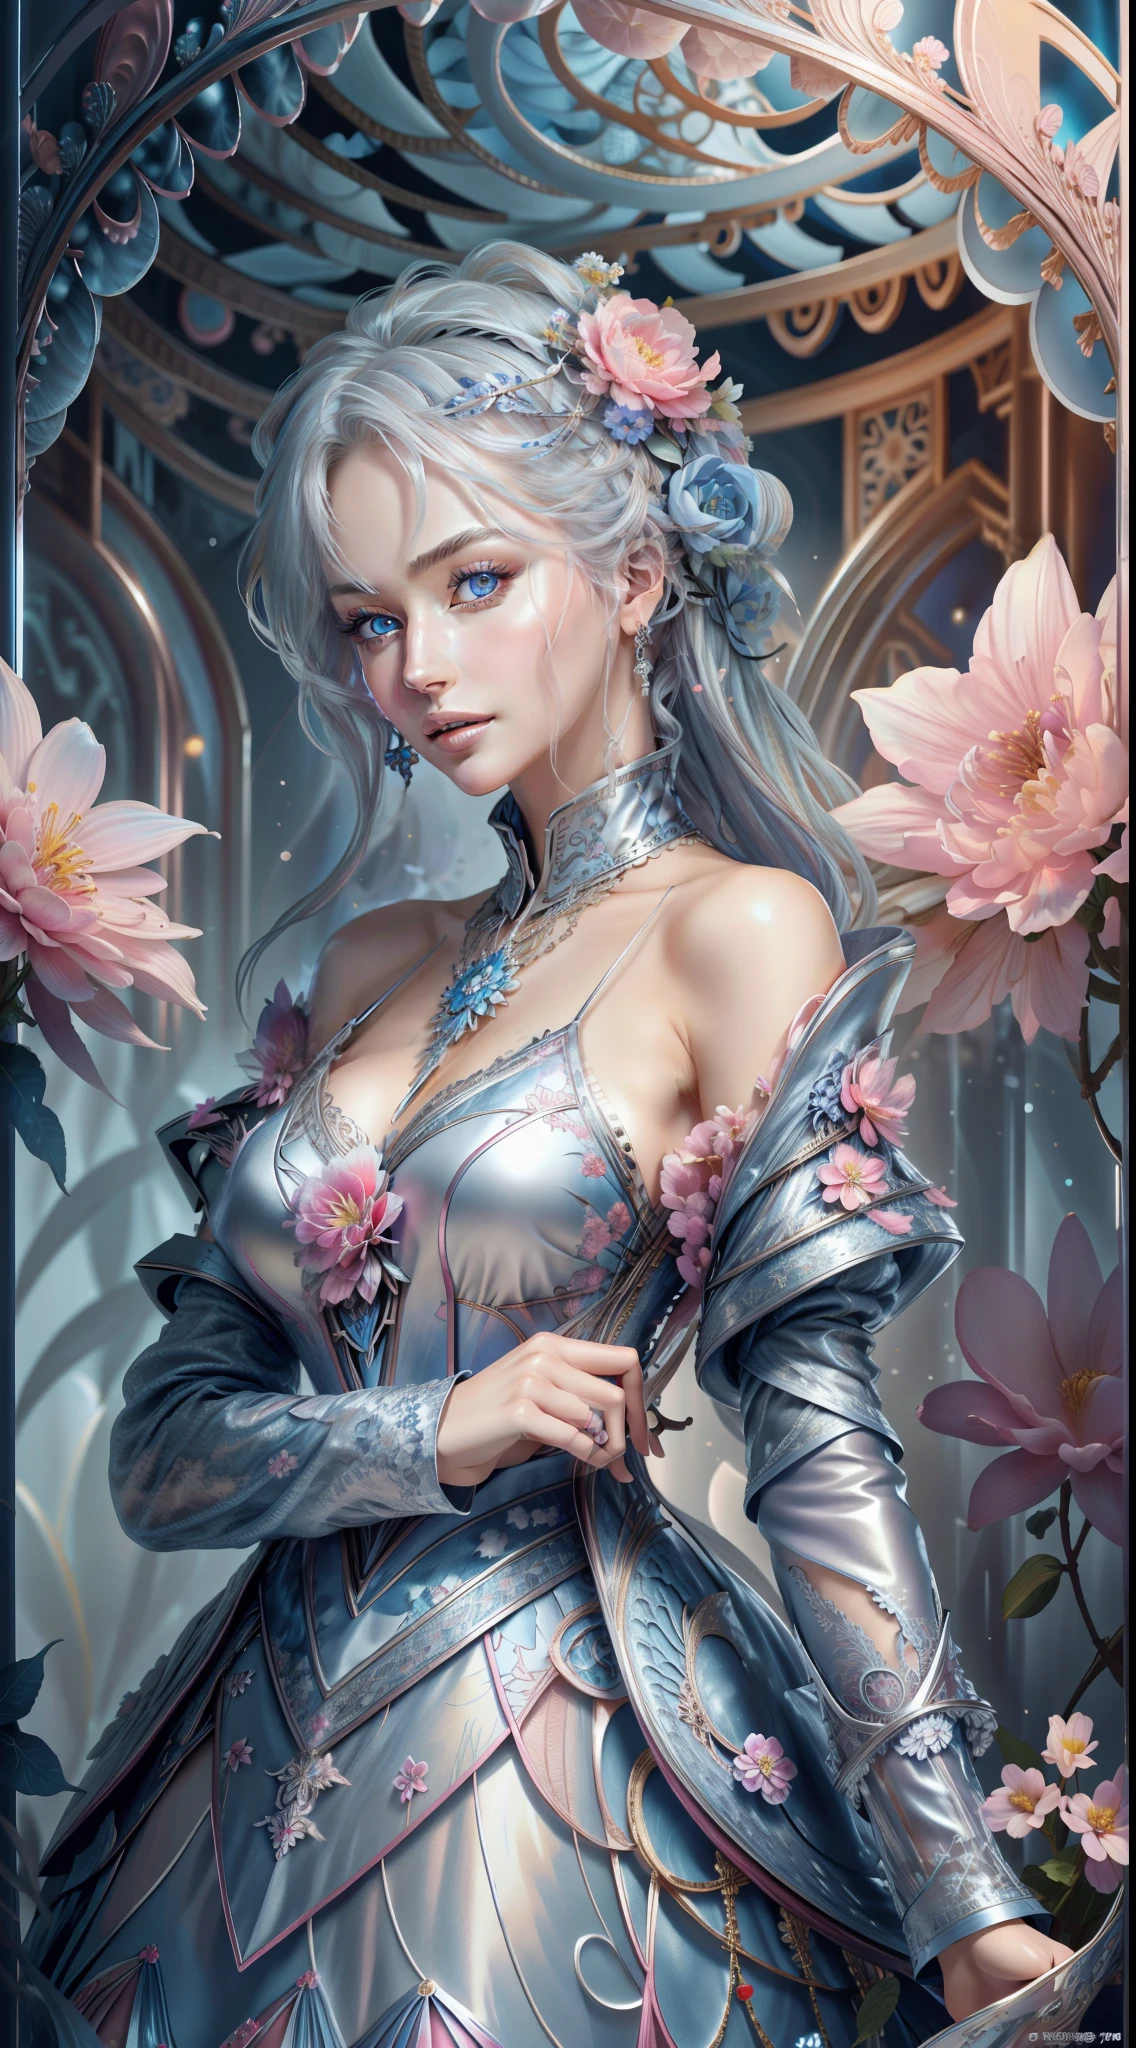 Beautiful lady , wonderful blue eyes, silver hair, pink lips, jacket cover her shoulderasterpiece, Top Quality, Best Quality, Official Art, Beautiful and Aesthetic: 1.2), (1 Flower), Upper Body, Extremely Detailed, (Fractal Art: 1.3), Colorful, Most Detailed, wearing jacket cover arms and shoulders 